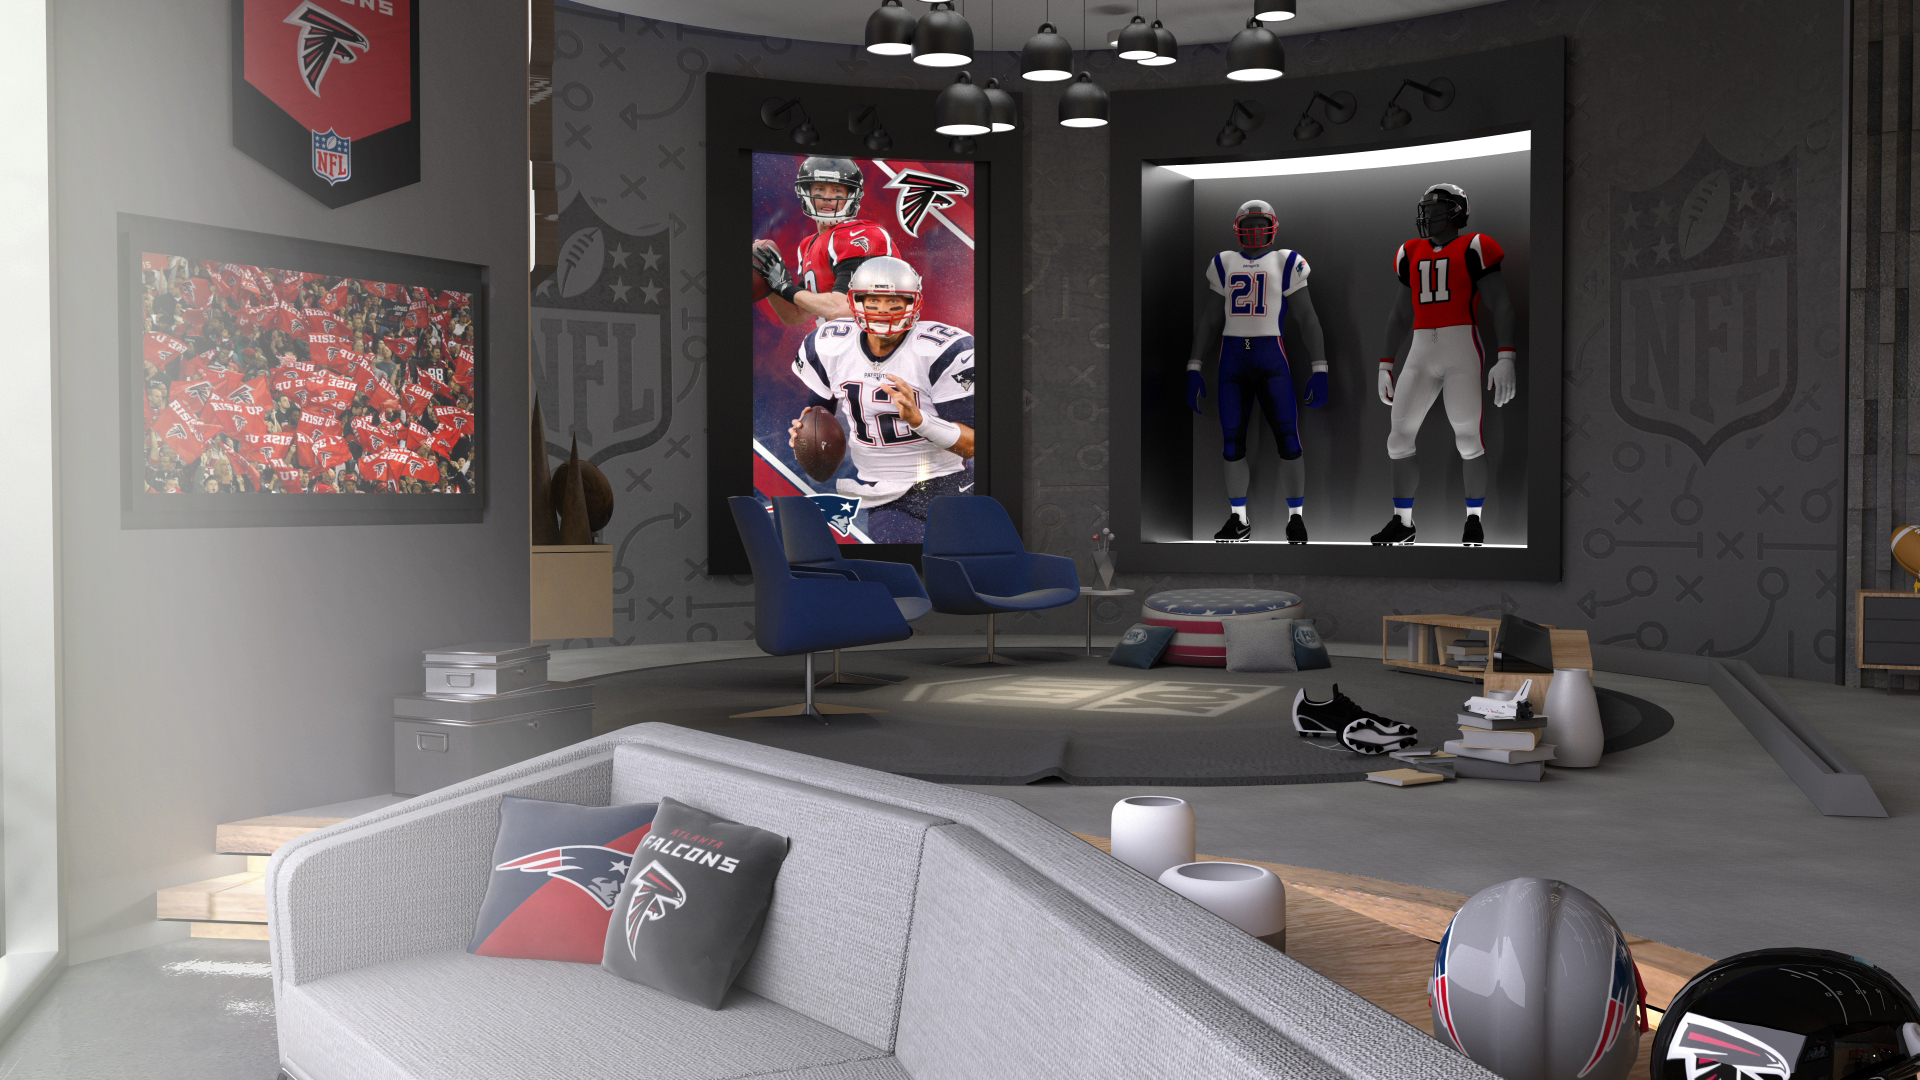 Here’s how to watch Super Bowl highlights in VR during the game | TechCrunch1920 x 1080